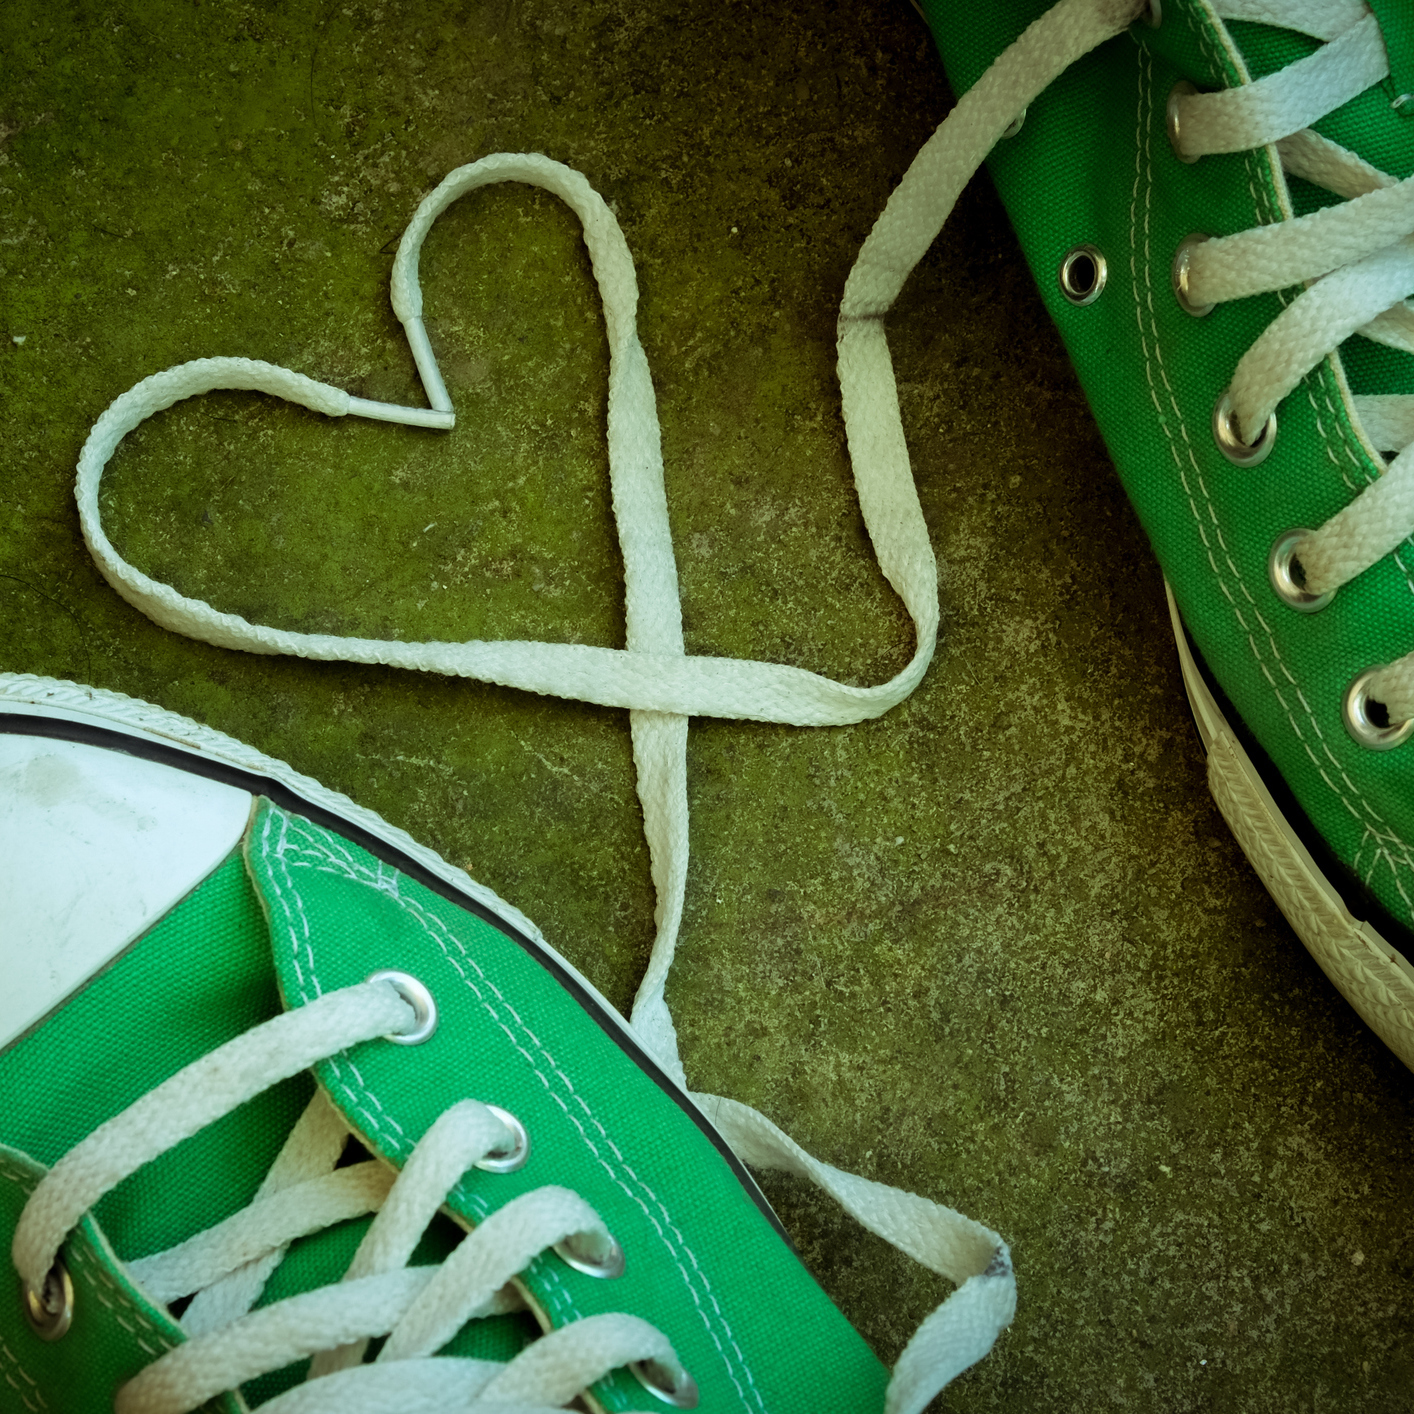 Sneakers with heart with filter effect retro vintage style.